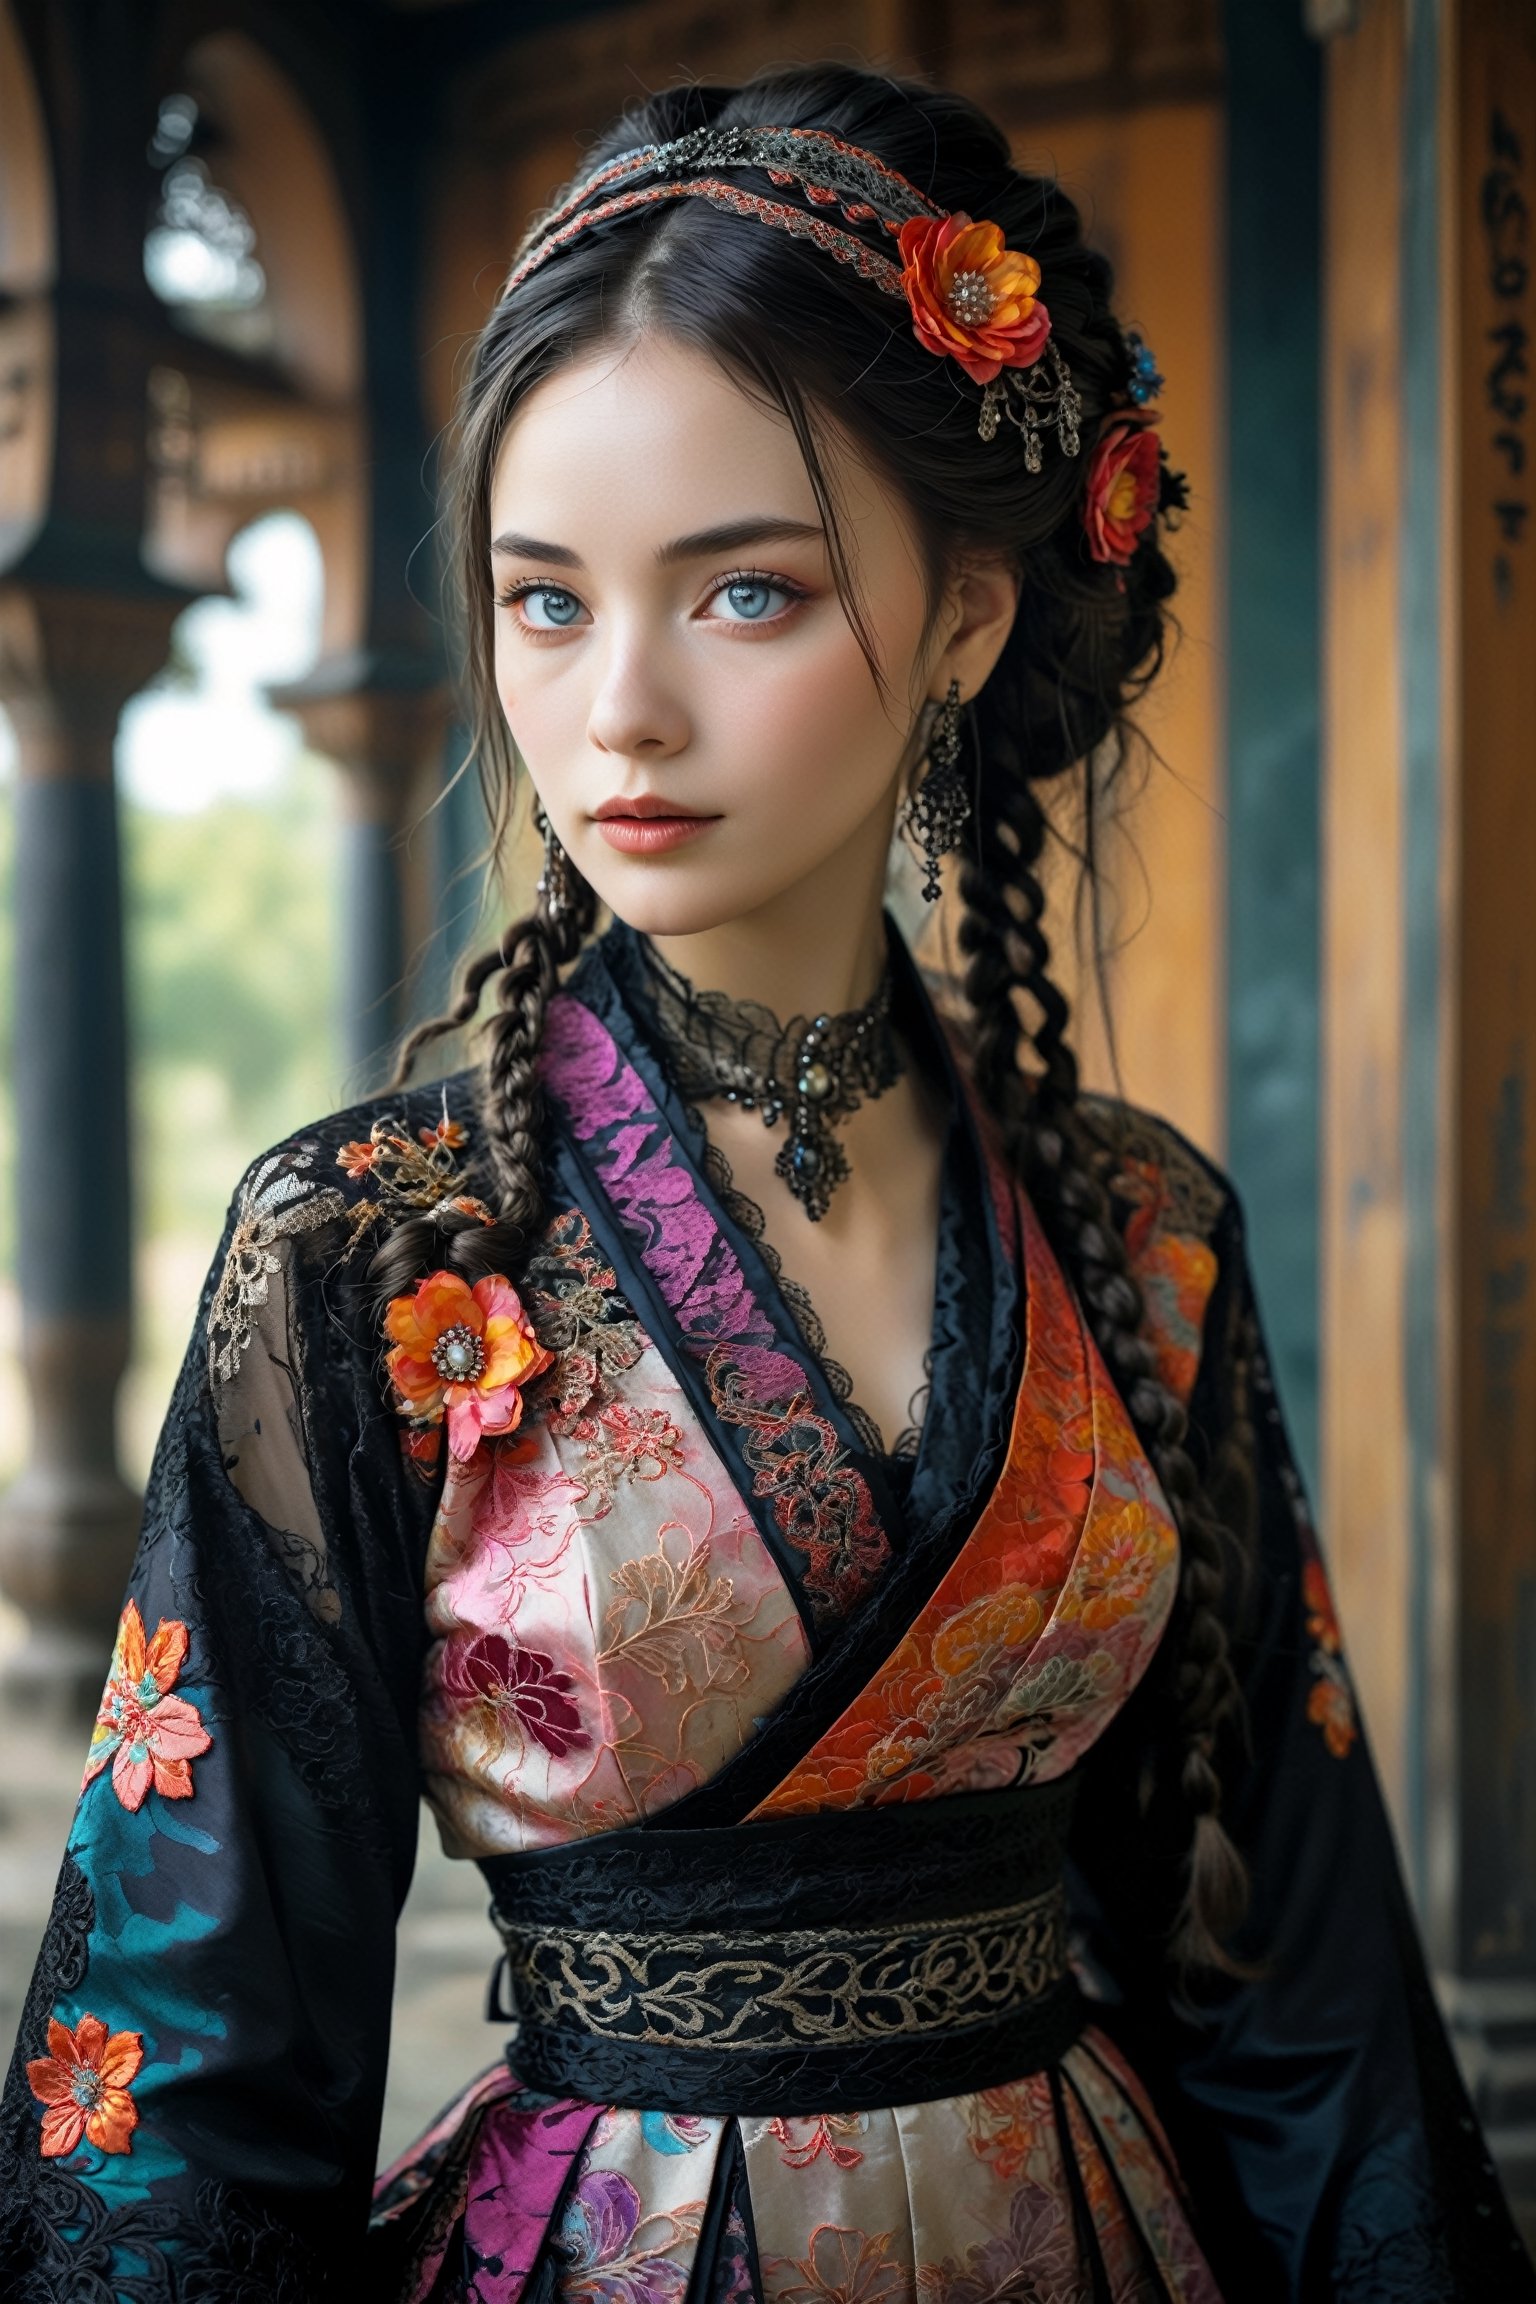  (beautiful French woman), beautiful Eyes,in a Central Asian wedding outfit, reimagined in Japanese Gothic style,Her colorful dress features intricate embroidery with Gothic lace and black accents, Kimono-style sleeves and an obi belt add a Japanese touch. She accessorizes with dark gemstone jewelry and a lace veil, her hair styled with braids and colorful ribbons, This fusion of Eastern European, Central Asian, and Japanese Gothic elements creates a unique and sophisticated look.,bustle dress,mad-marbled-paper,PIXAR,azlnfrmdbl